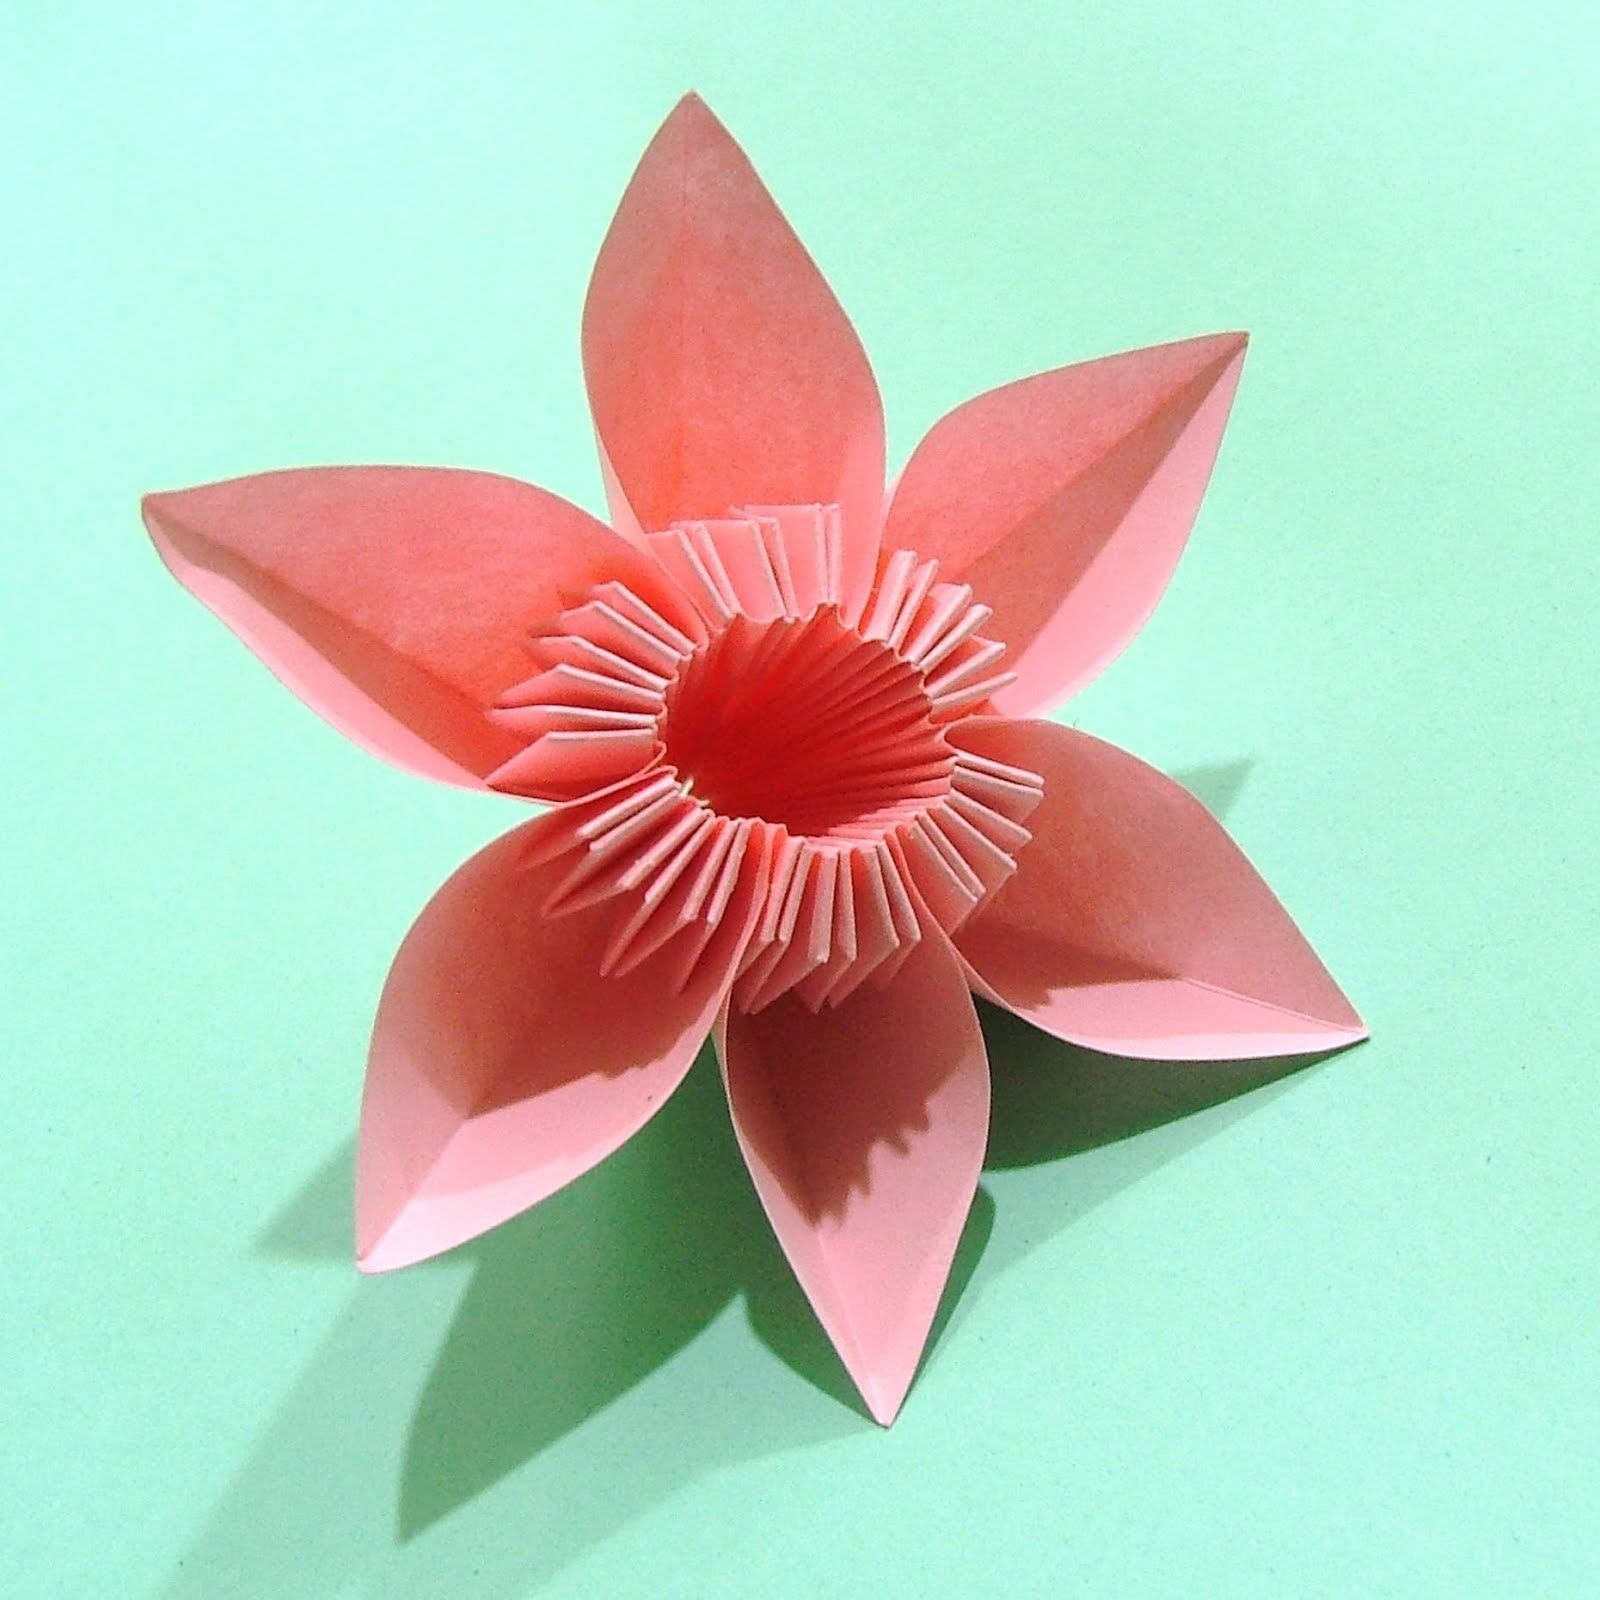 How To Make Origami Flower Origami Make Origami Flowers Simple Origami Flower Easy 2d Origami